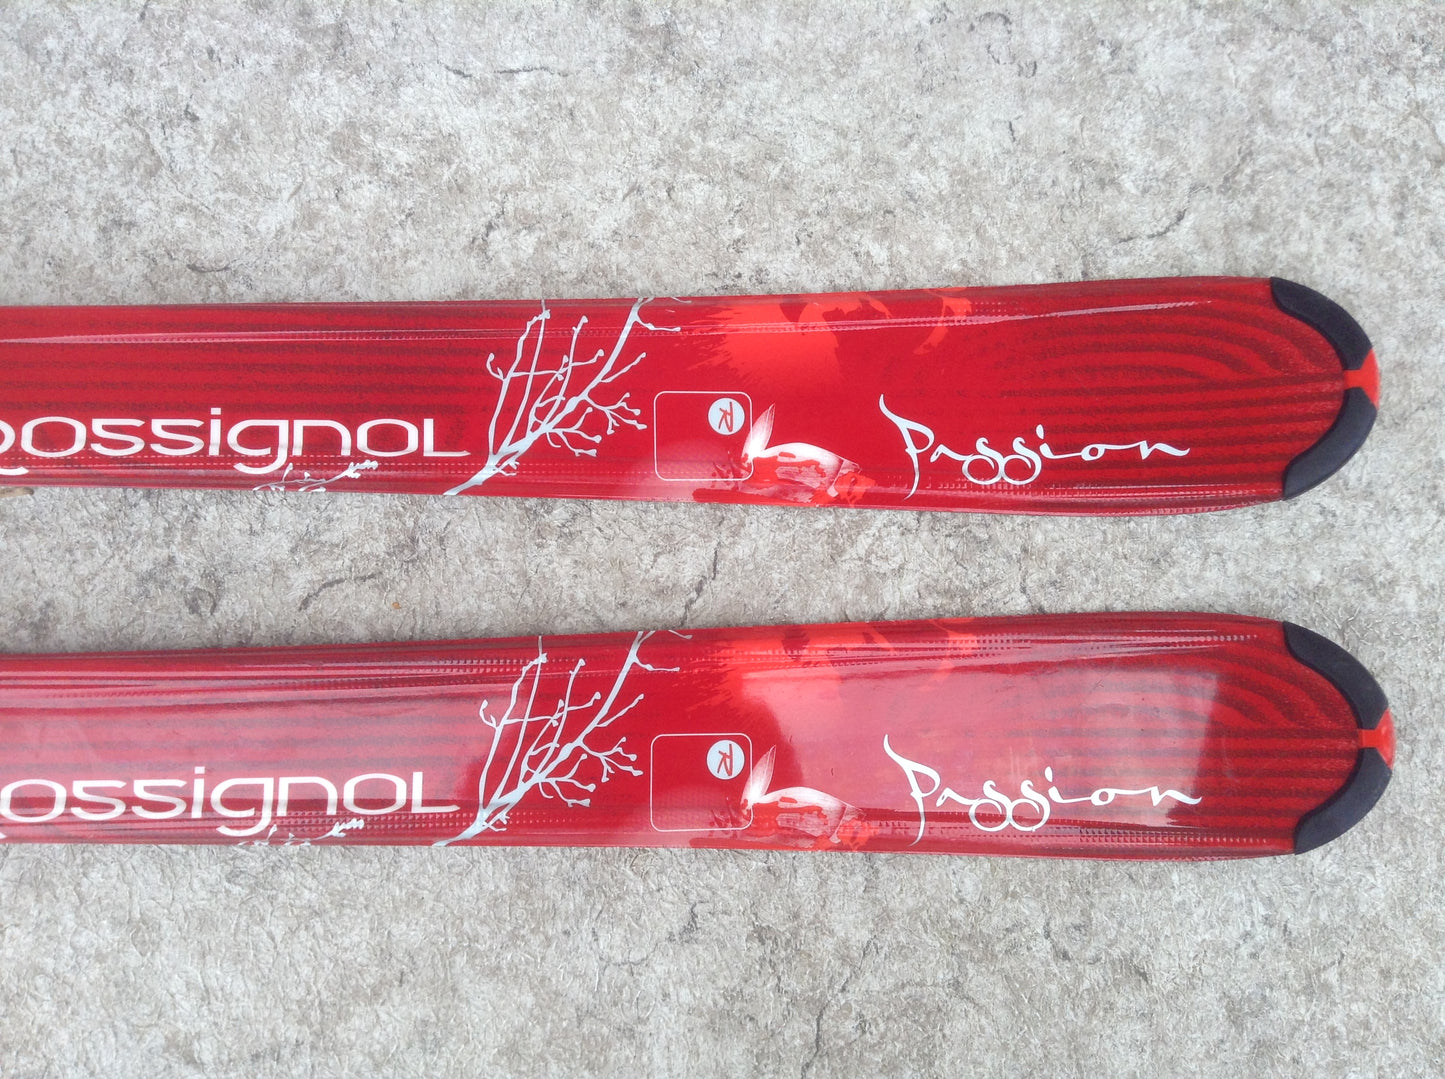 Ski 162 Rossignol Potion Parabolic Red White With Bindings Excellent